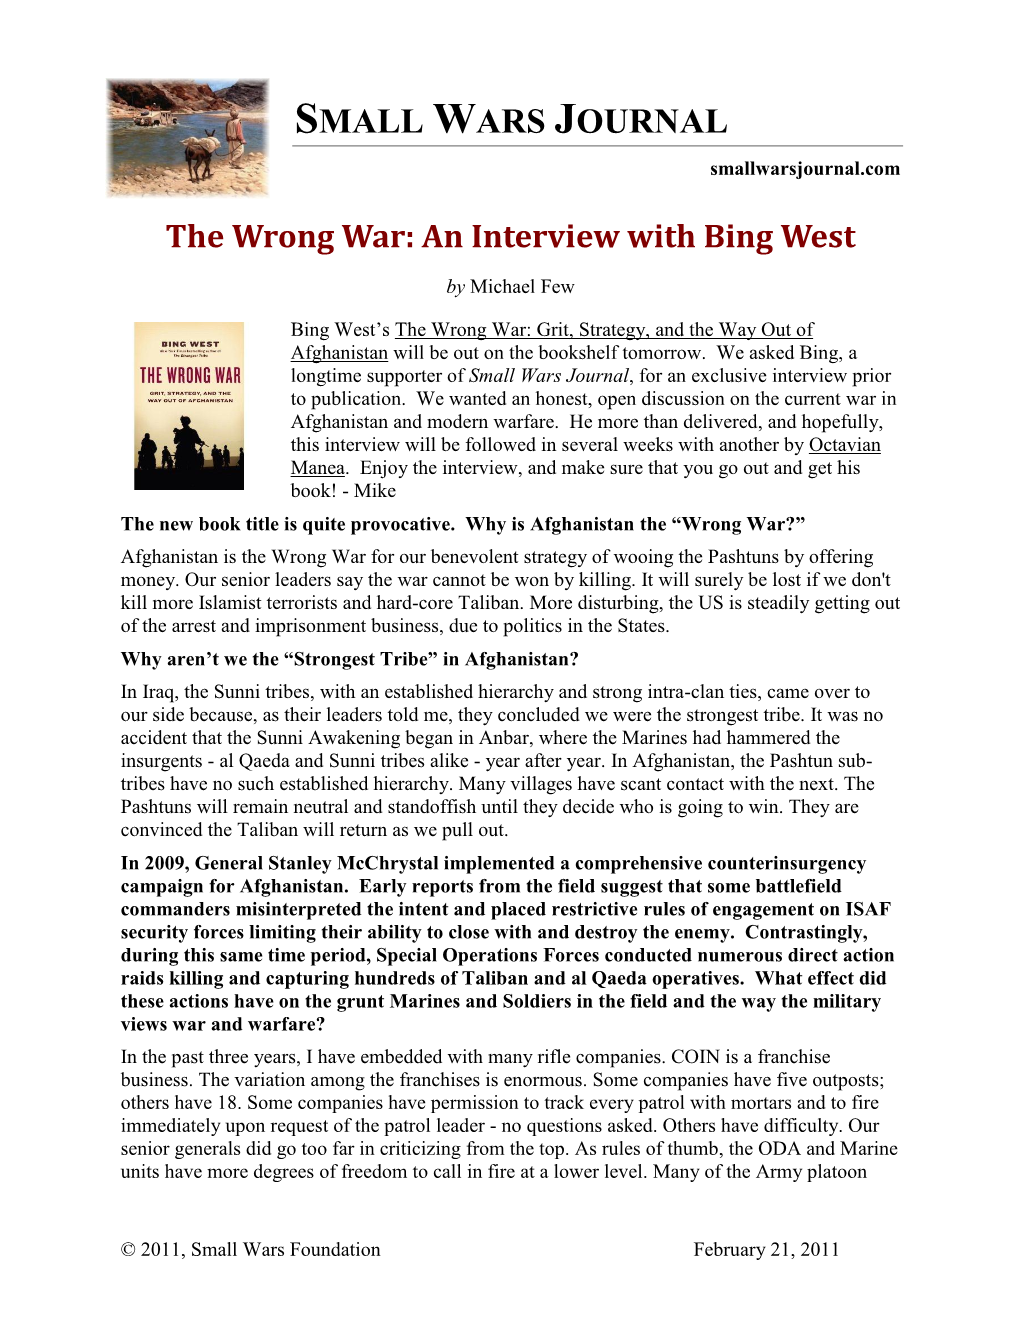 An Interview with Bing West